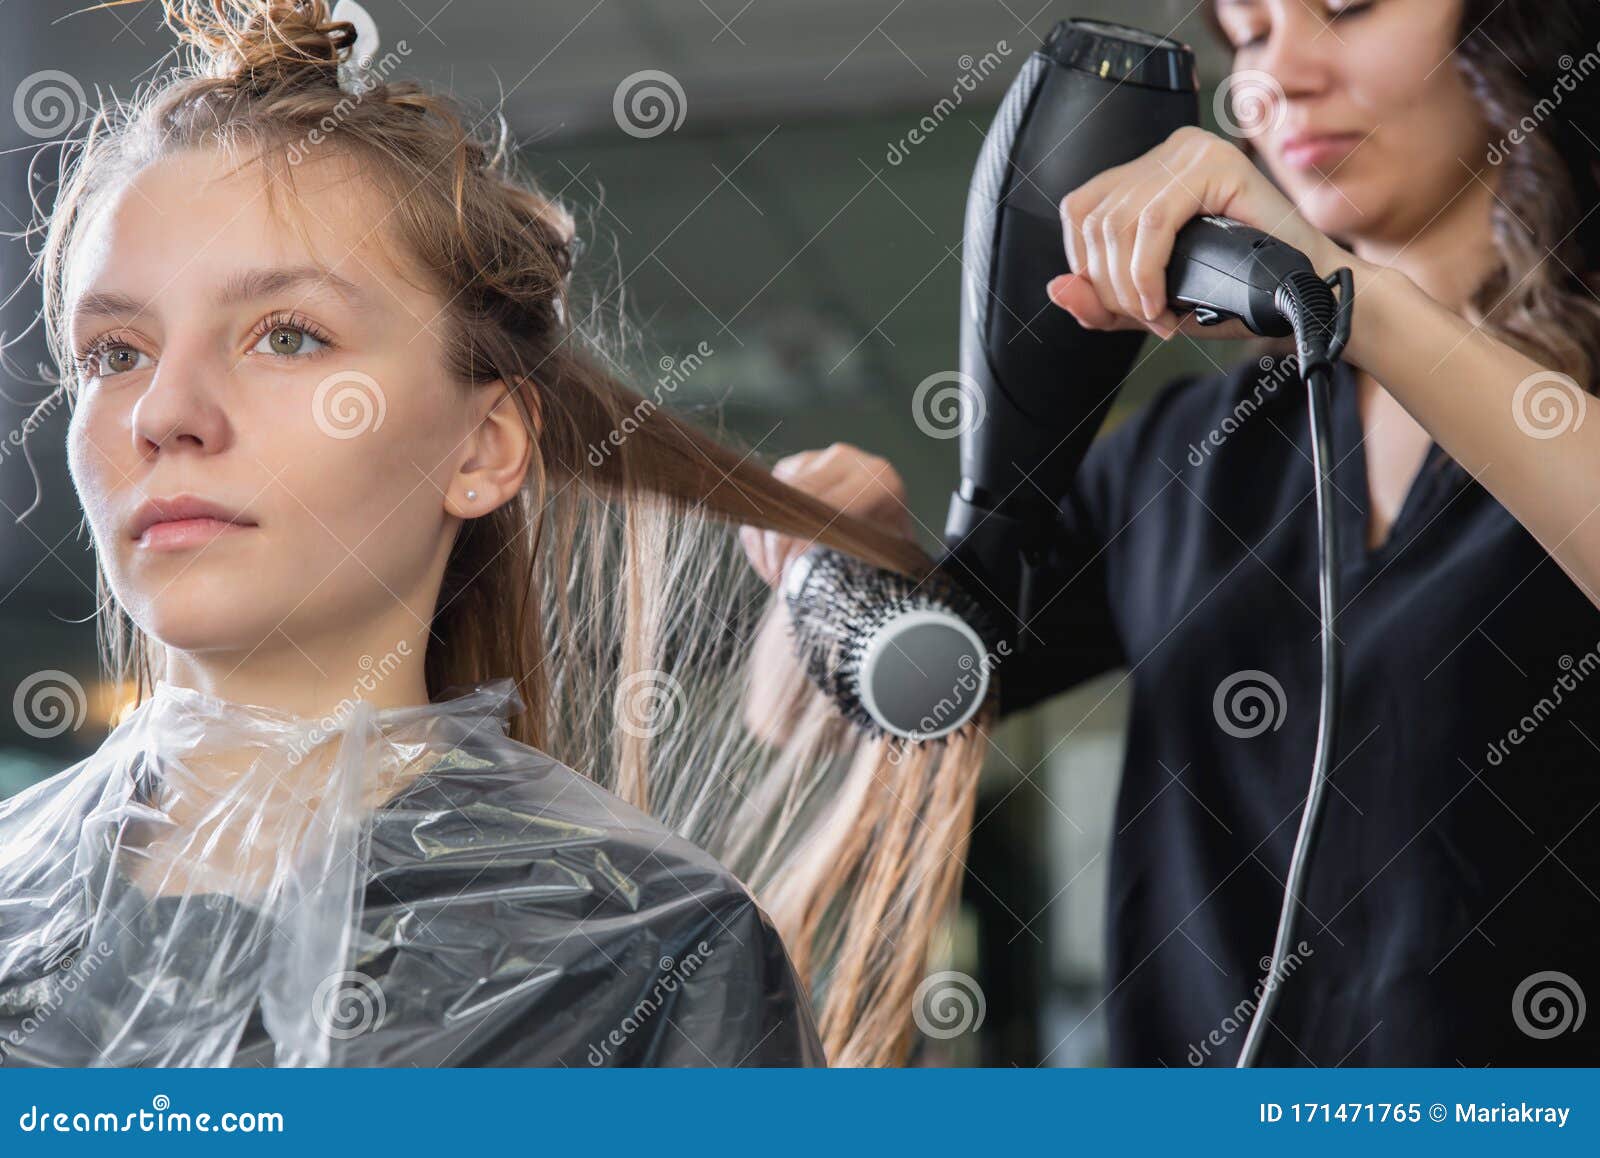 Close Up of Hairdressers Hands Drying Long Blond Hair with Blow Dryer and Round  Brush Stock Image - Image of beauty, brush: 171471765